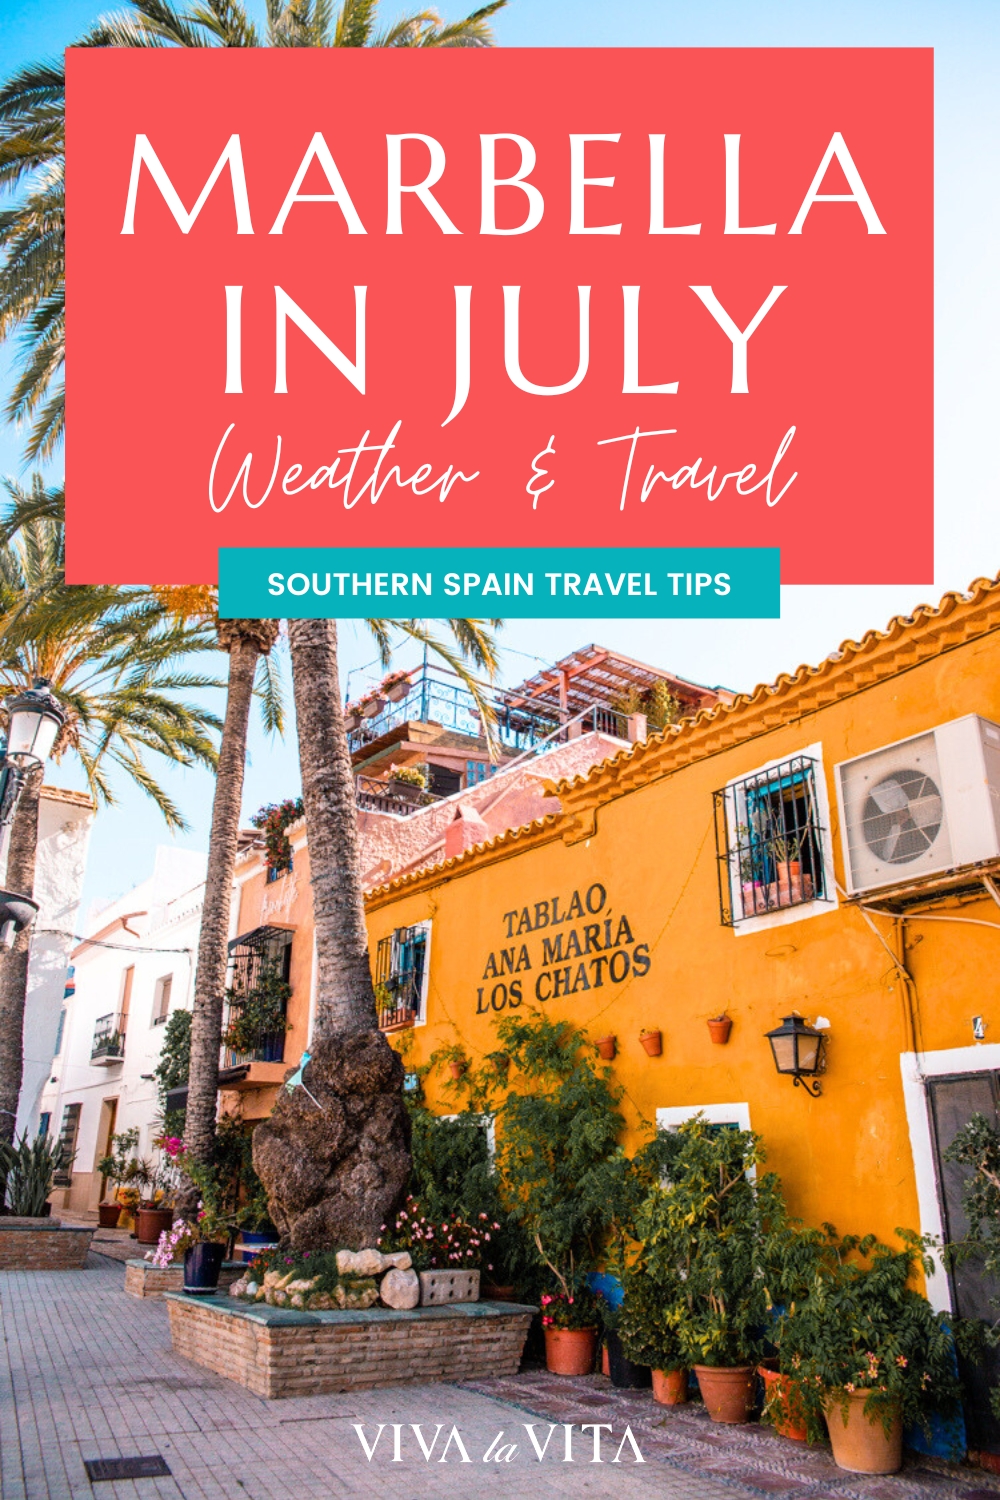 Pinterest image showing Marbella old town with a headline - Marbella in July weather and travel, Southern Spain Travel tips